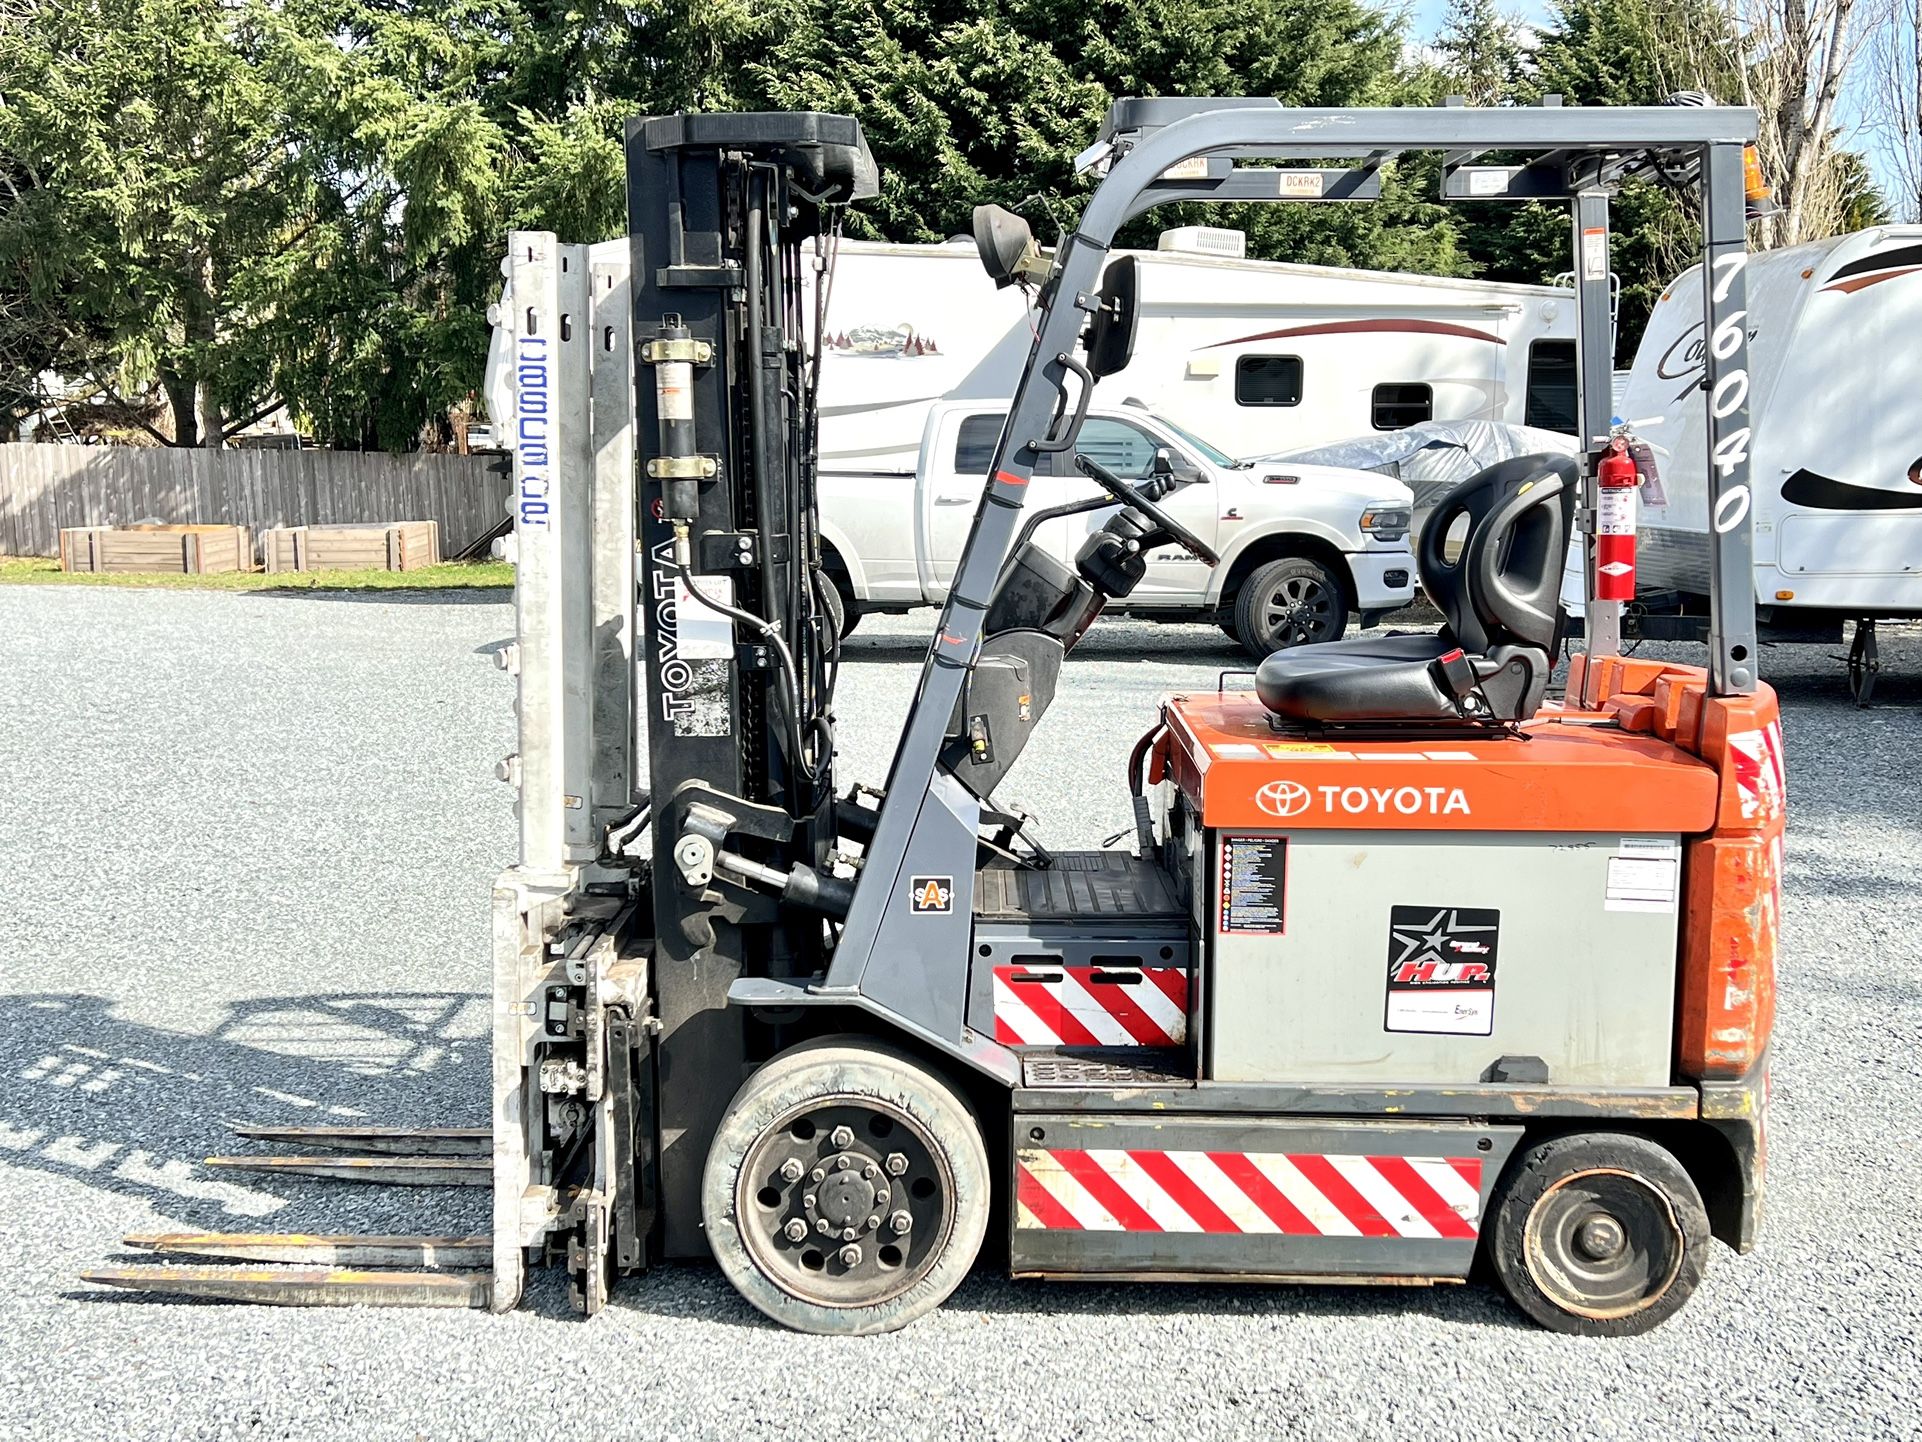 Toyota Forklift Electric 5,000 lb Capacity 